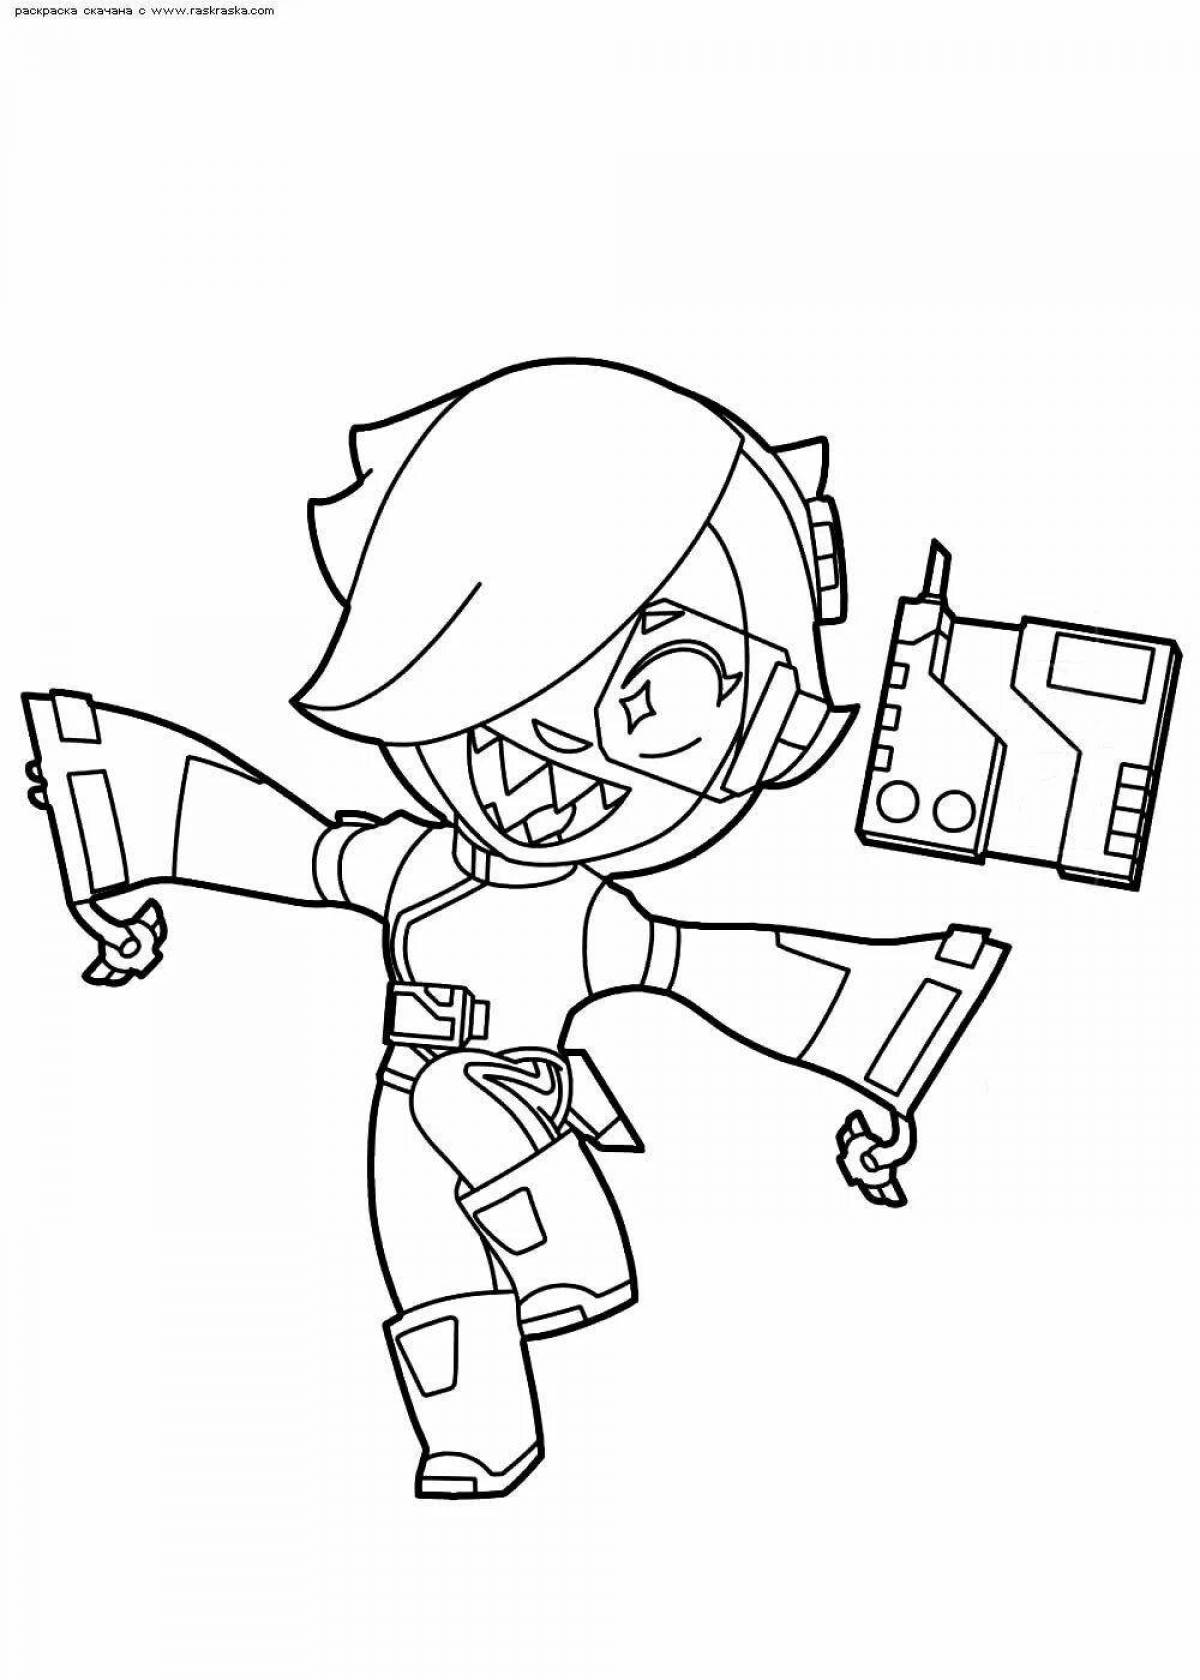 Colette from brawl stars #4